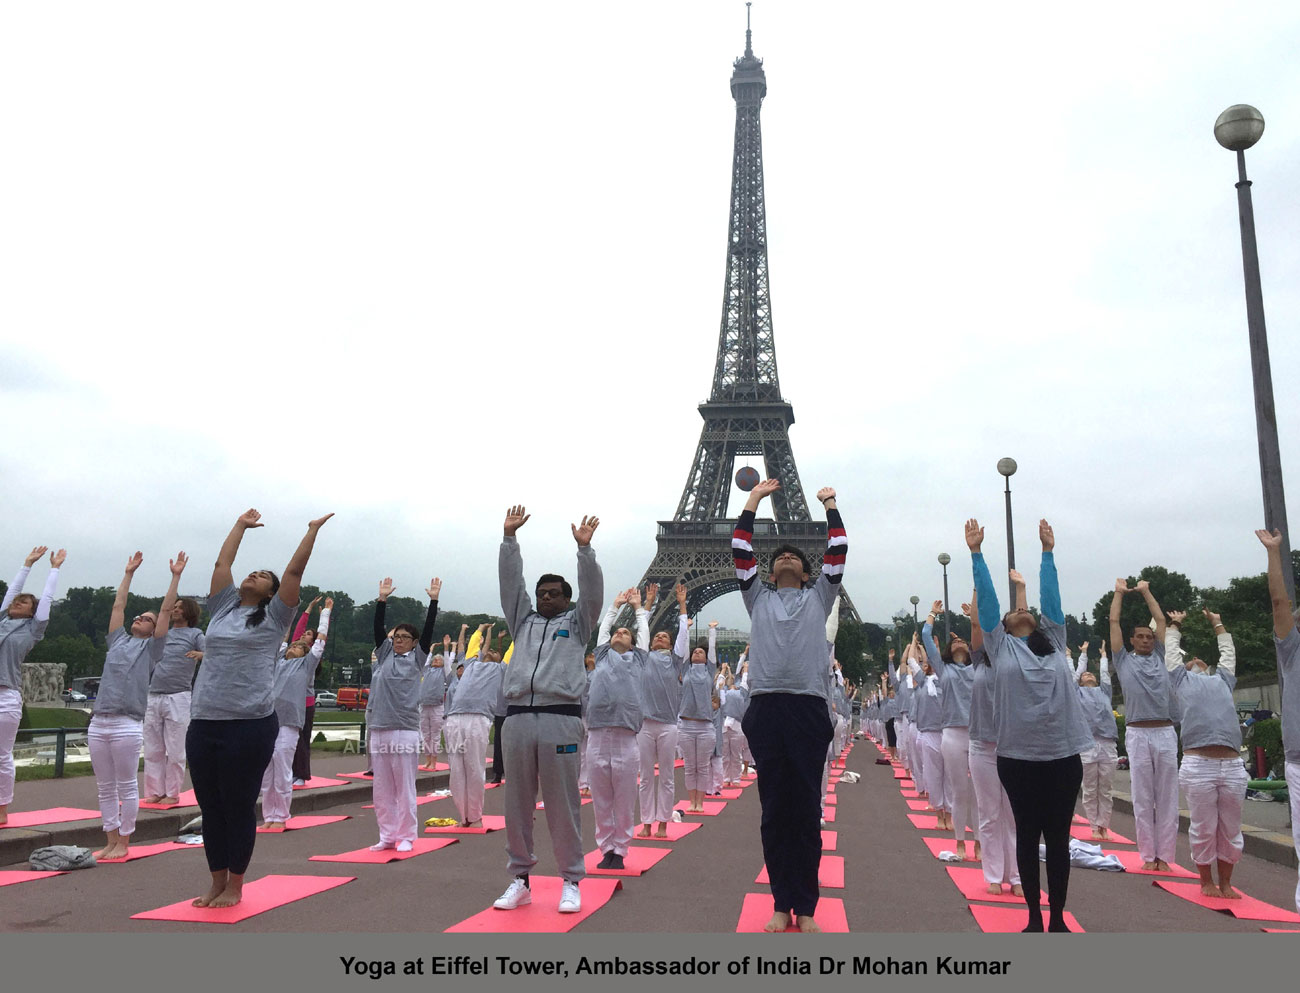 Euro Cup and Yoga Festival at Eiffel Tower Rocked Paris - Picture 1